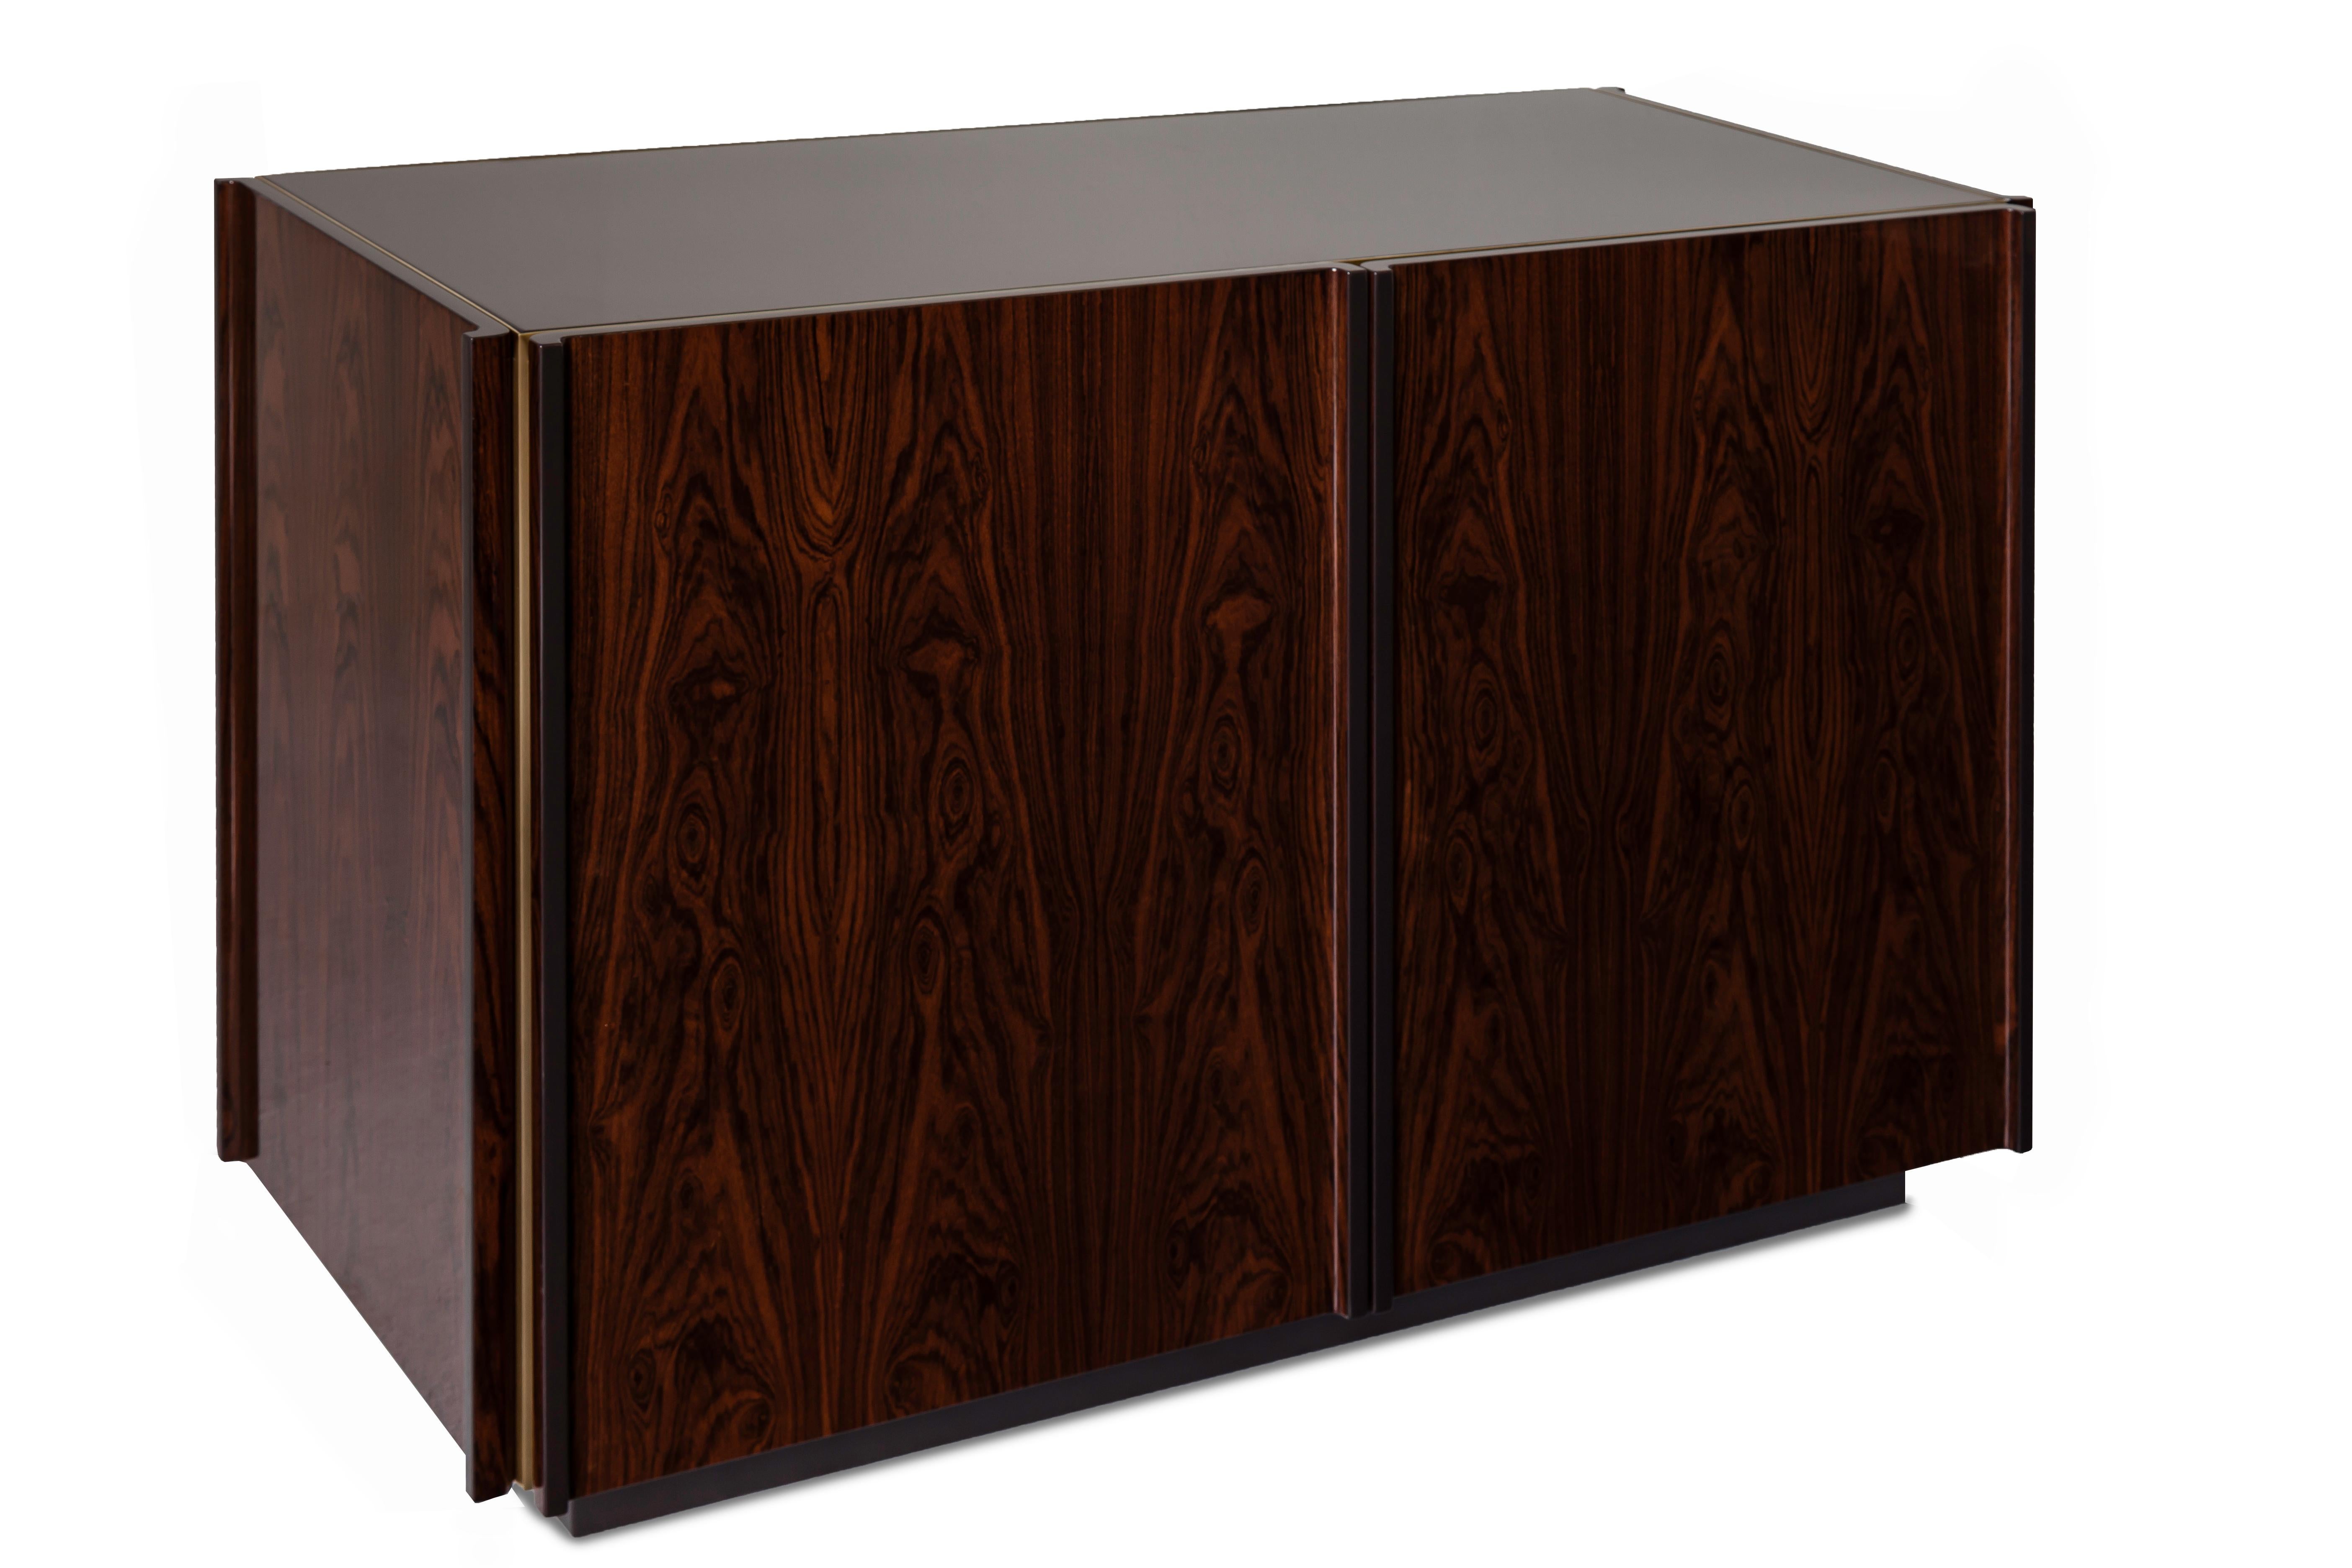 Oscar credenza is a combination of Modern lines and contemporary design challenges, for an imposing and sophisticated design to your home.
It is all covered on the sides with exclusively selected Brazilian wood veneers which in all corners are